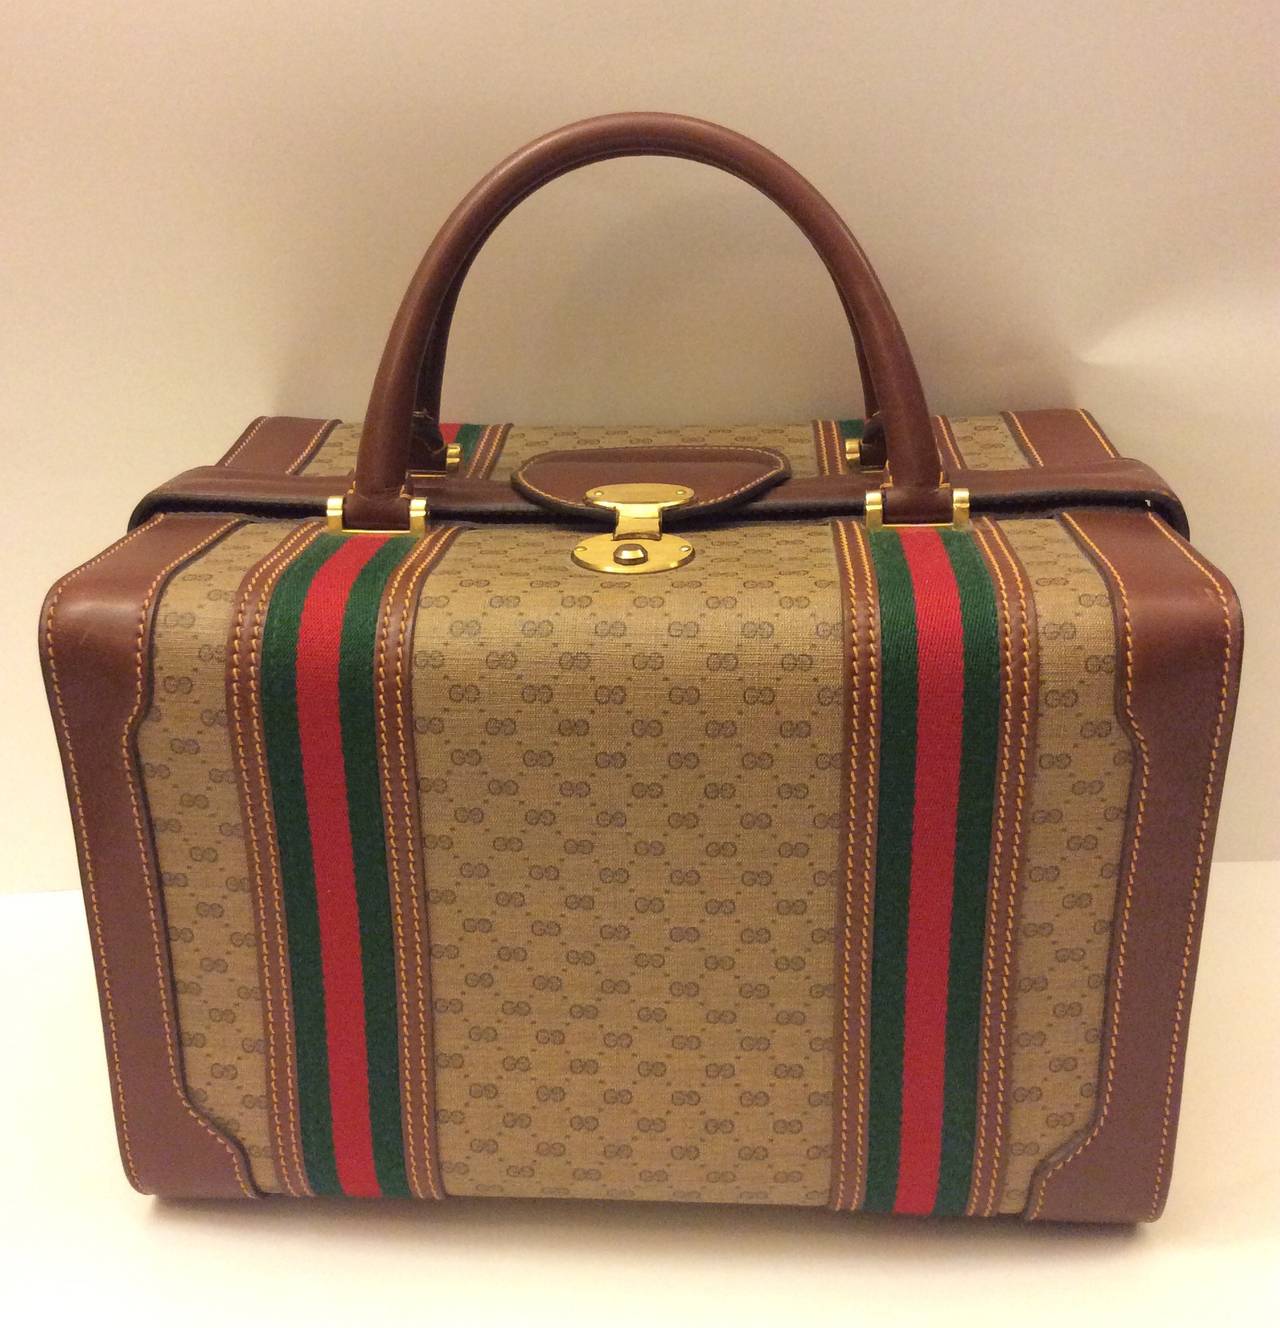 This is an authentic GUCCI Vintage Monogram Train Case. The classic features and fine quality of this vintage Gucci train case make this sophisticated for travel. The case has a beautiful, distinctive structure and is crafted of classic Gucci GG